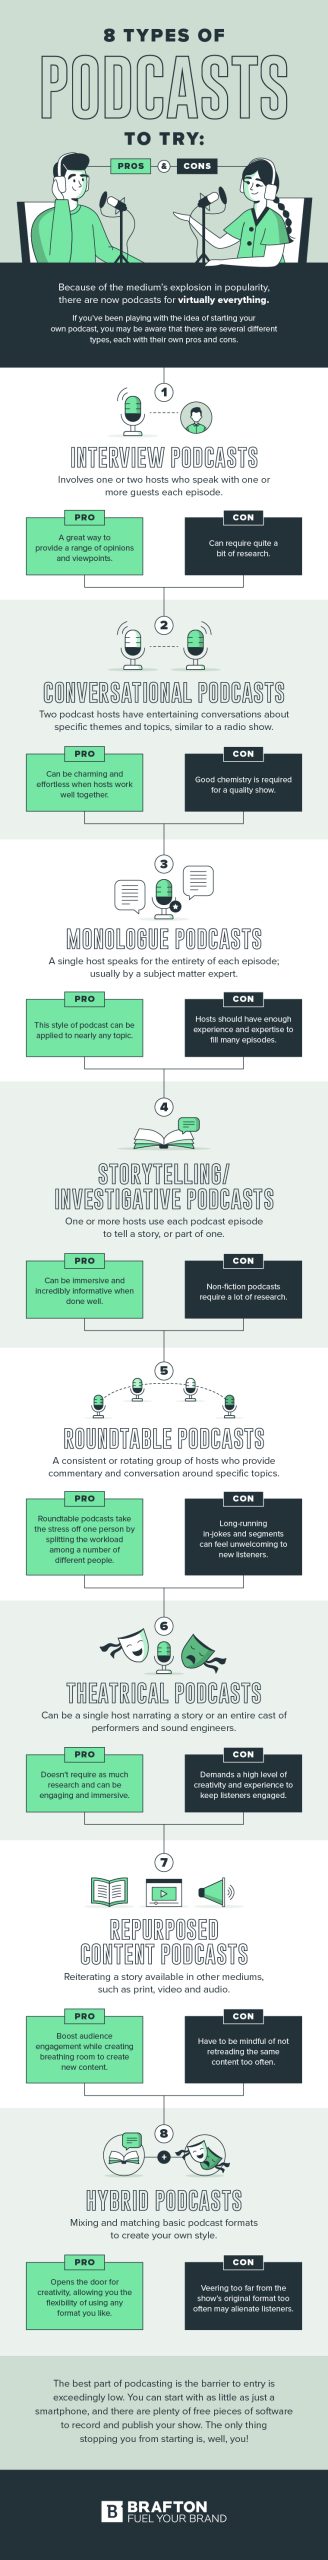 types of podcasts